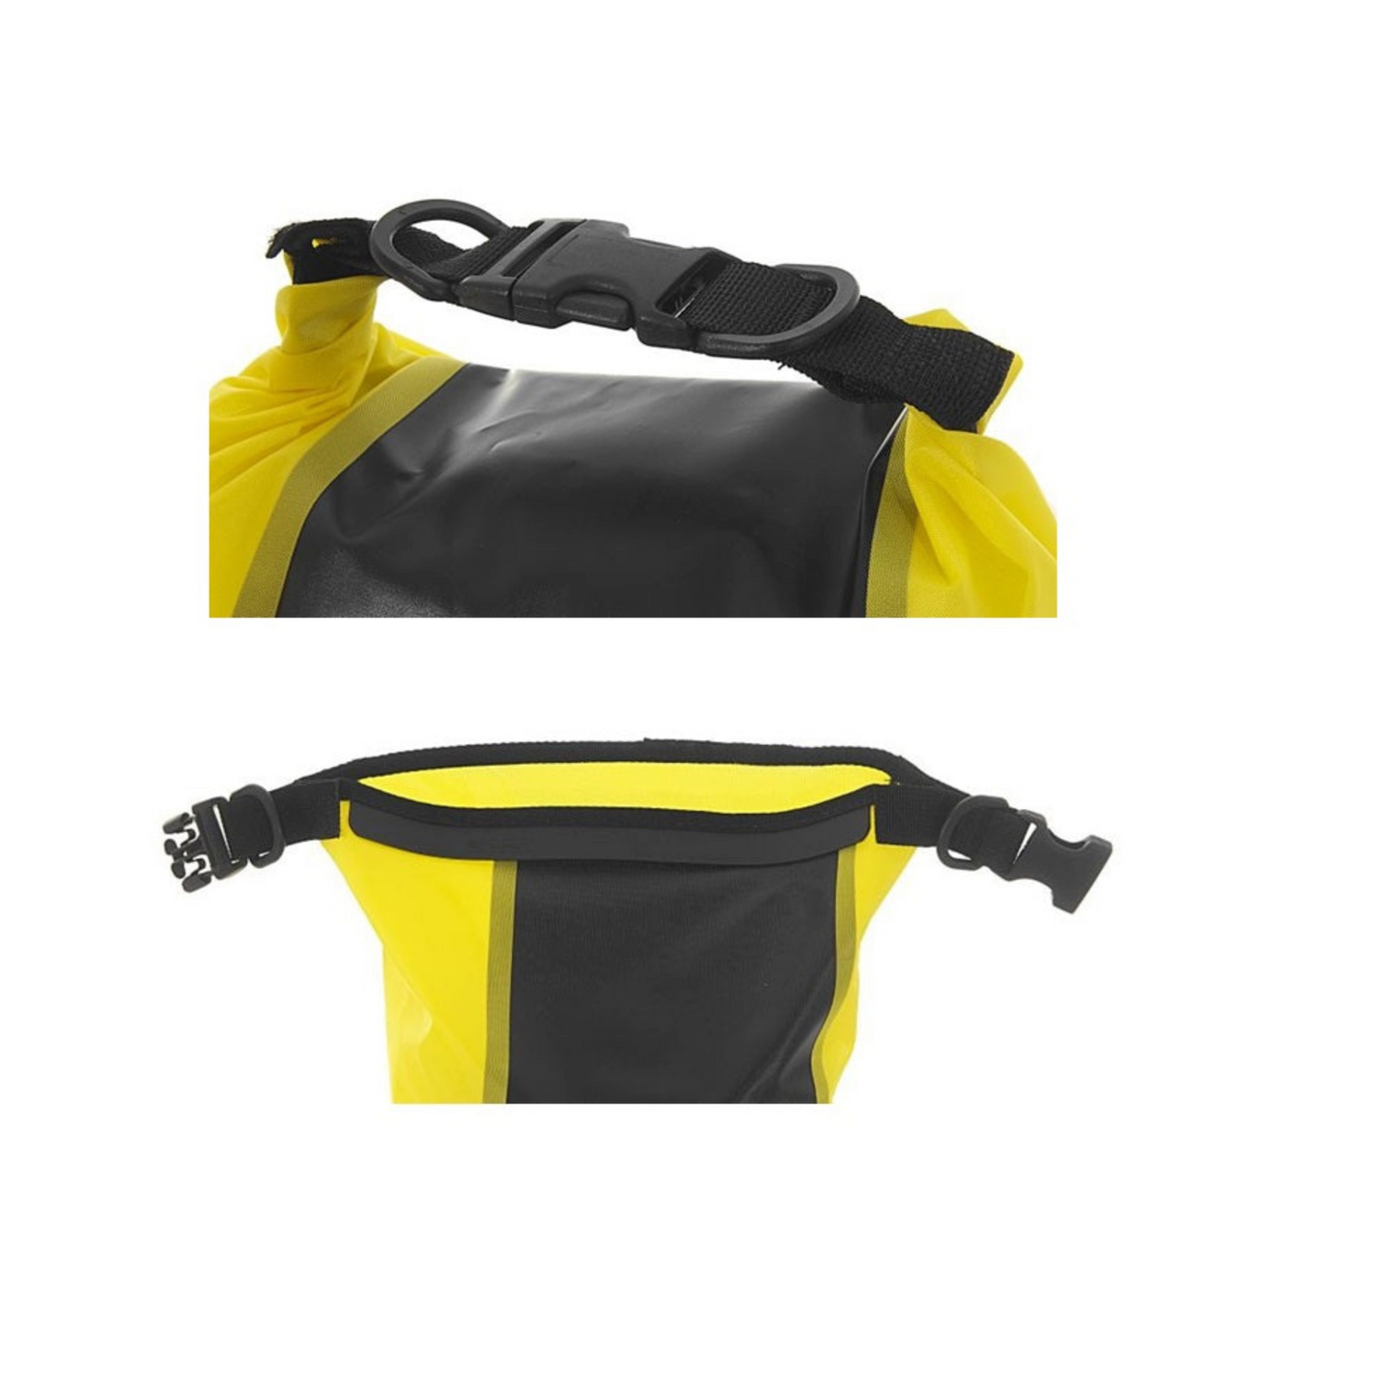 Waterproof Dry Bag PS17, Size XS (3 Litres)